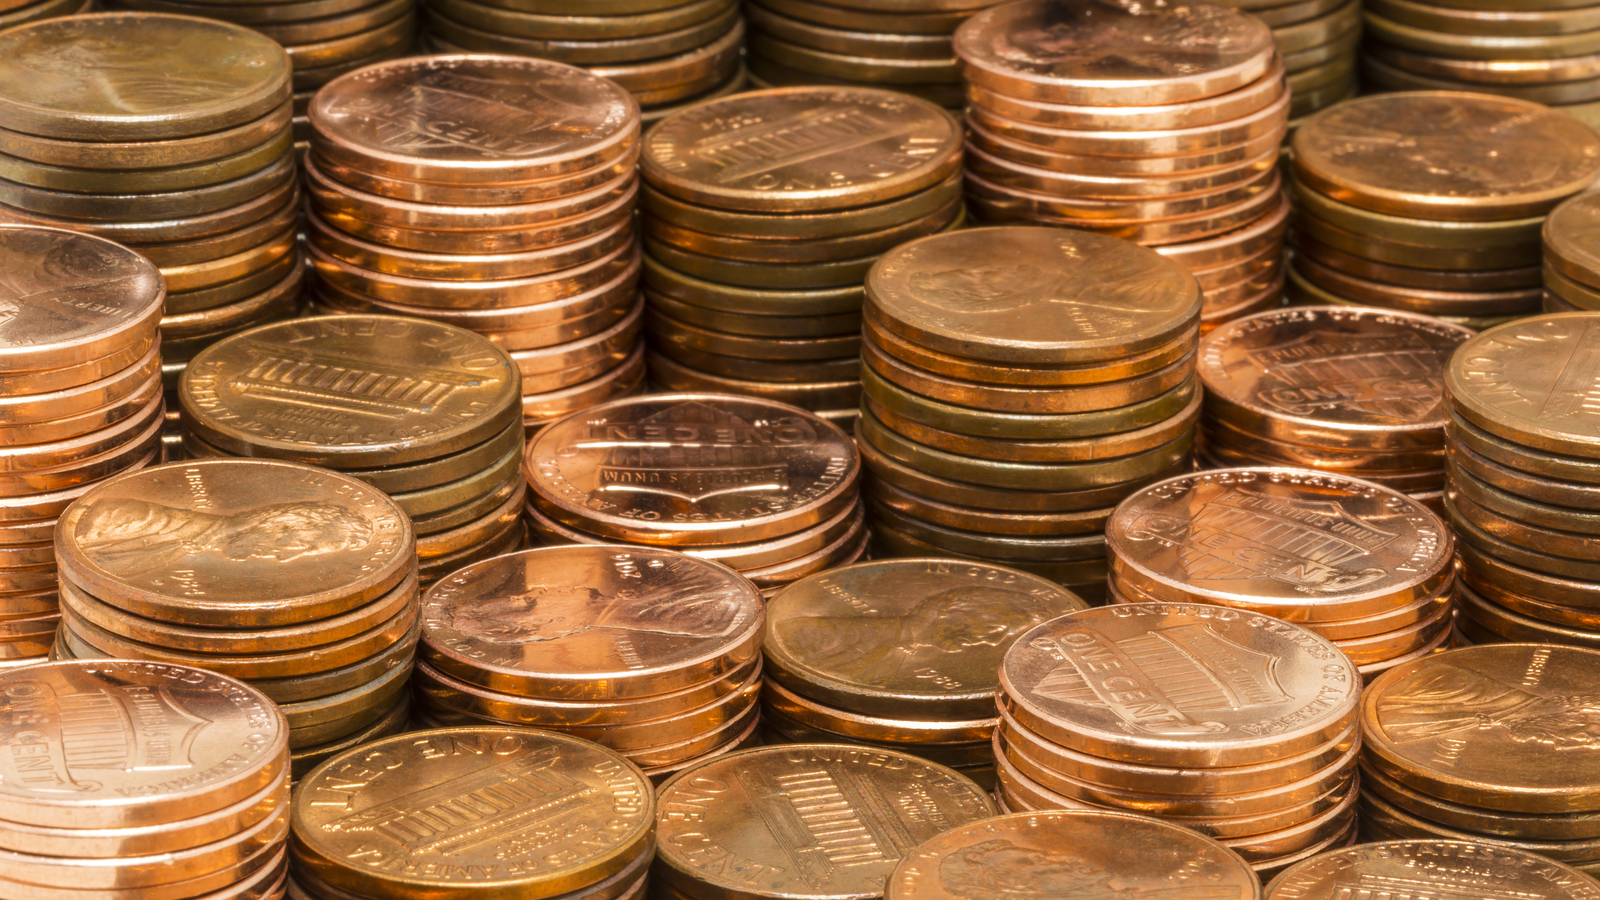 Stacks of pennies representing penny stocks.